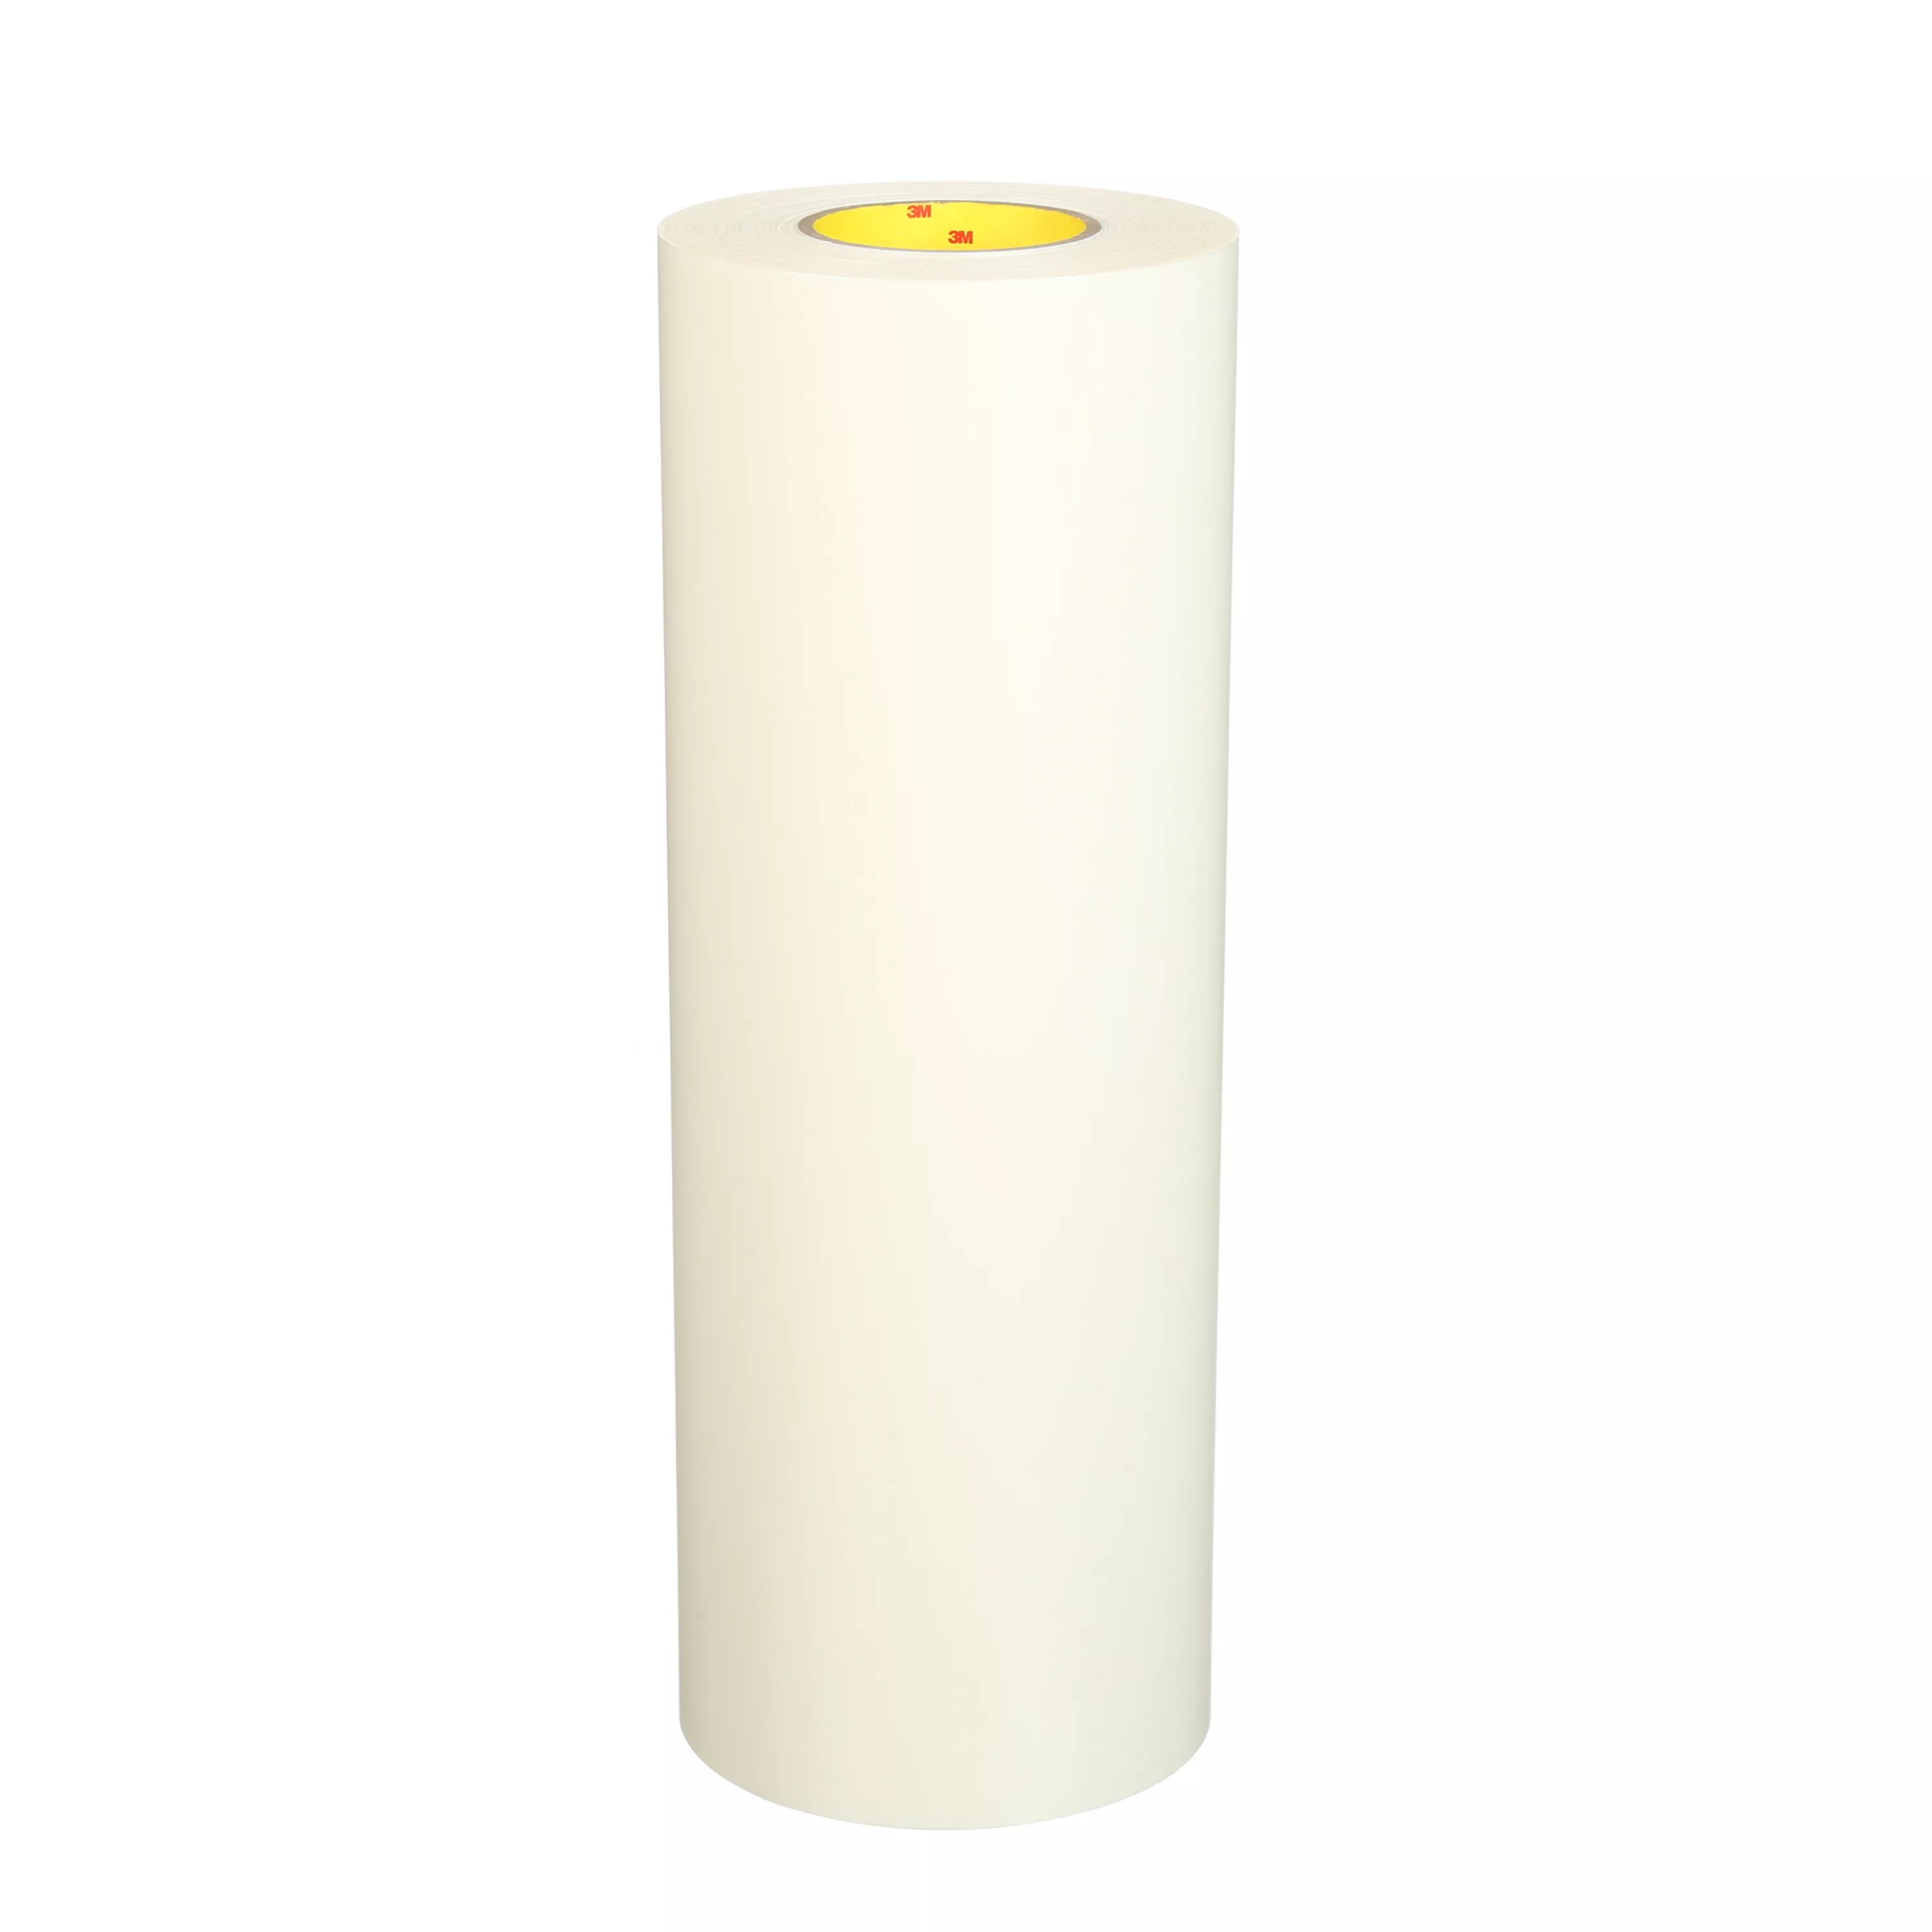 3M™ Cushion-Mount™ Plus Plate Mounting Tape B1020, White, 54 in x 36
yd,20 mil, 1 Roll/Case